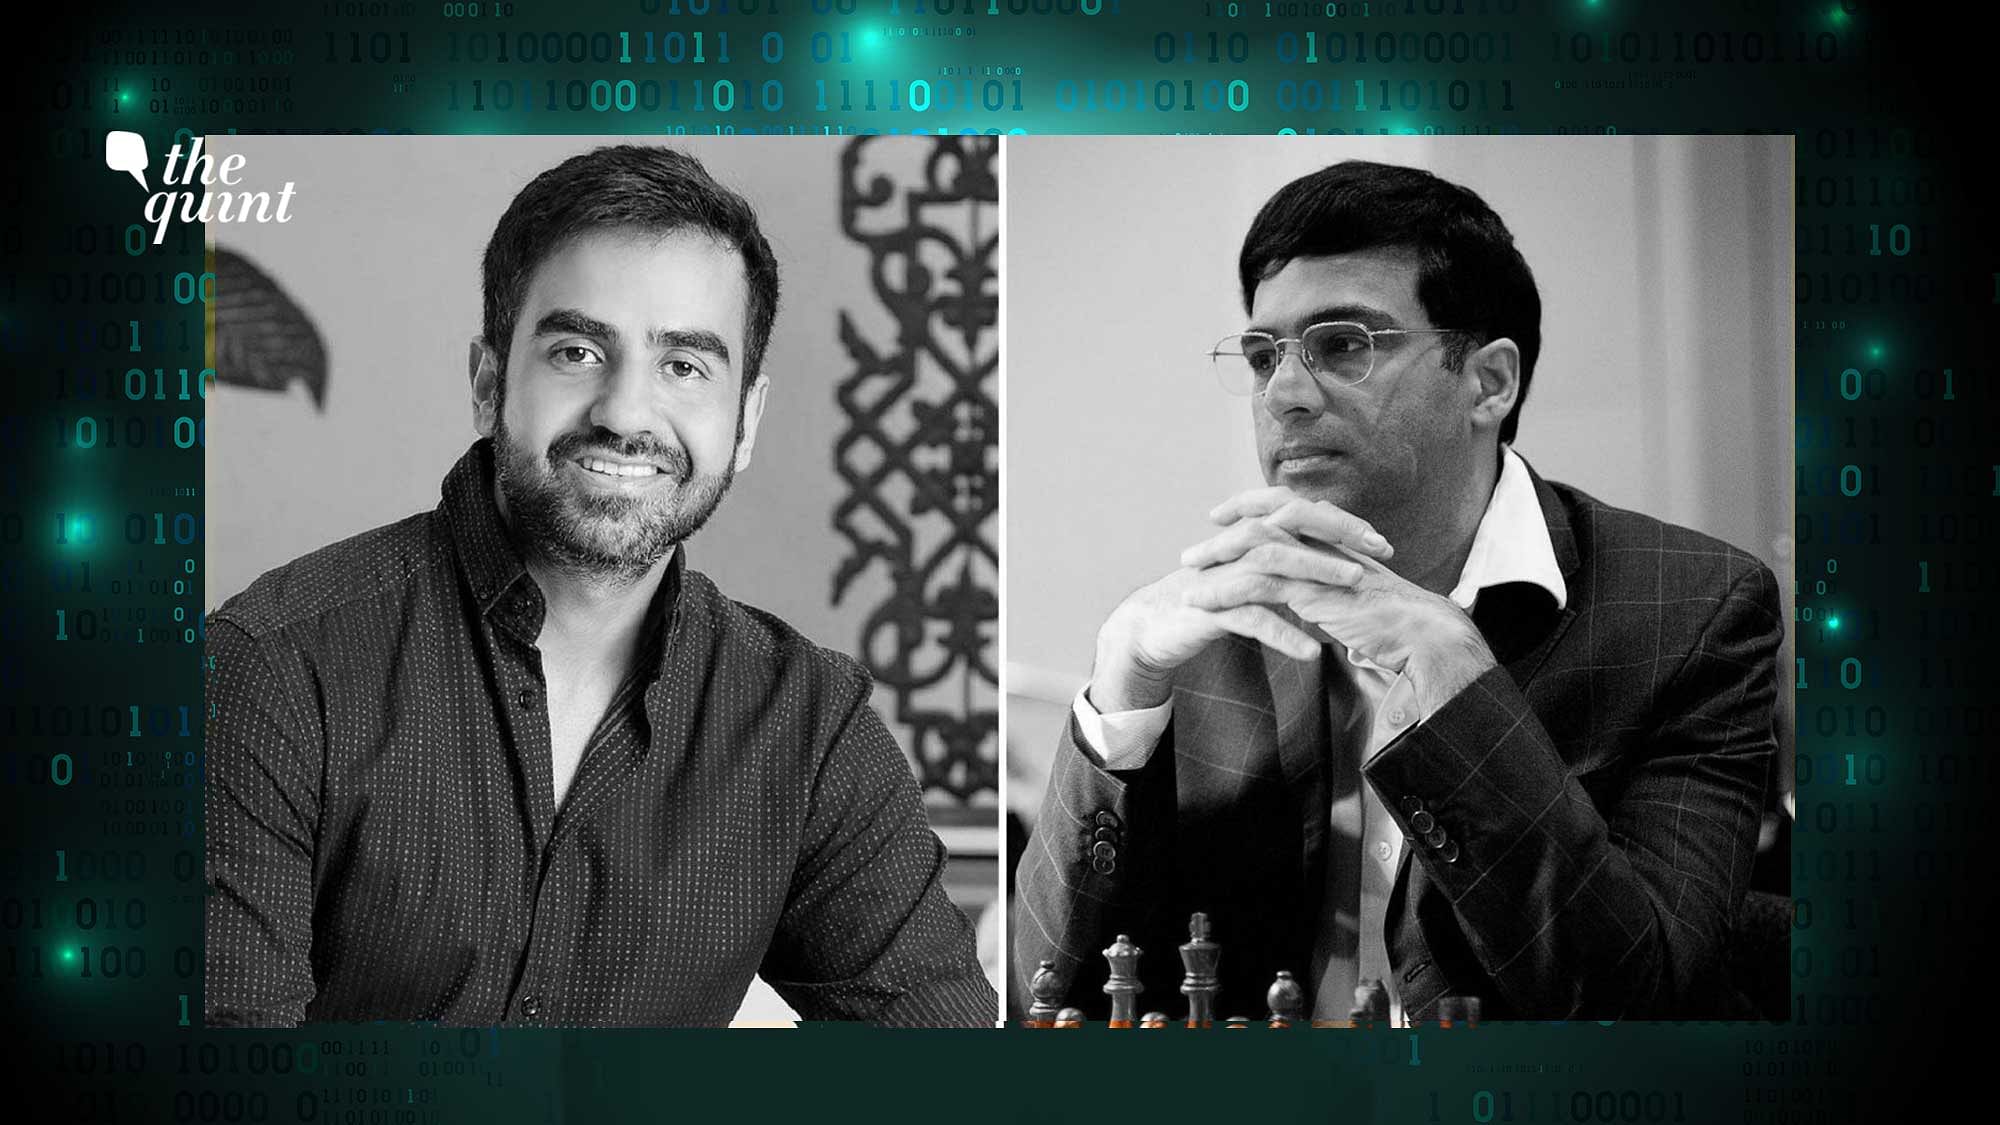 <div class="paragraphs"><p>The chess event, held for charity, was streamed online and piqued interest when Anand resigned from the match.</p></div>